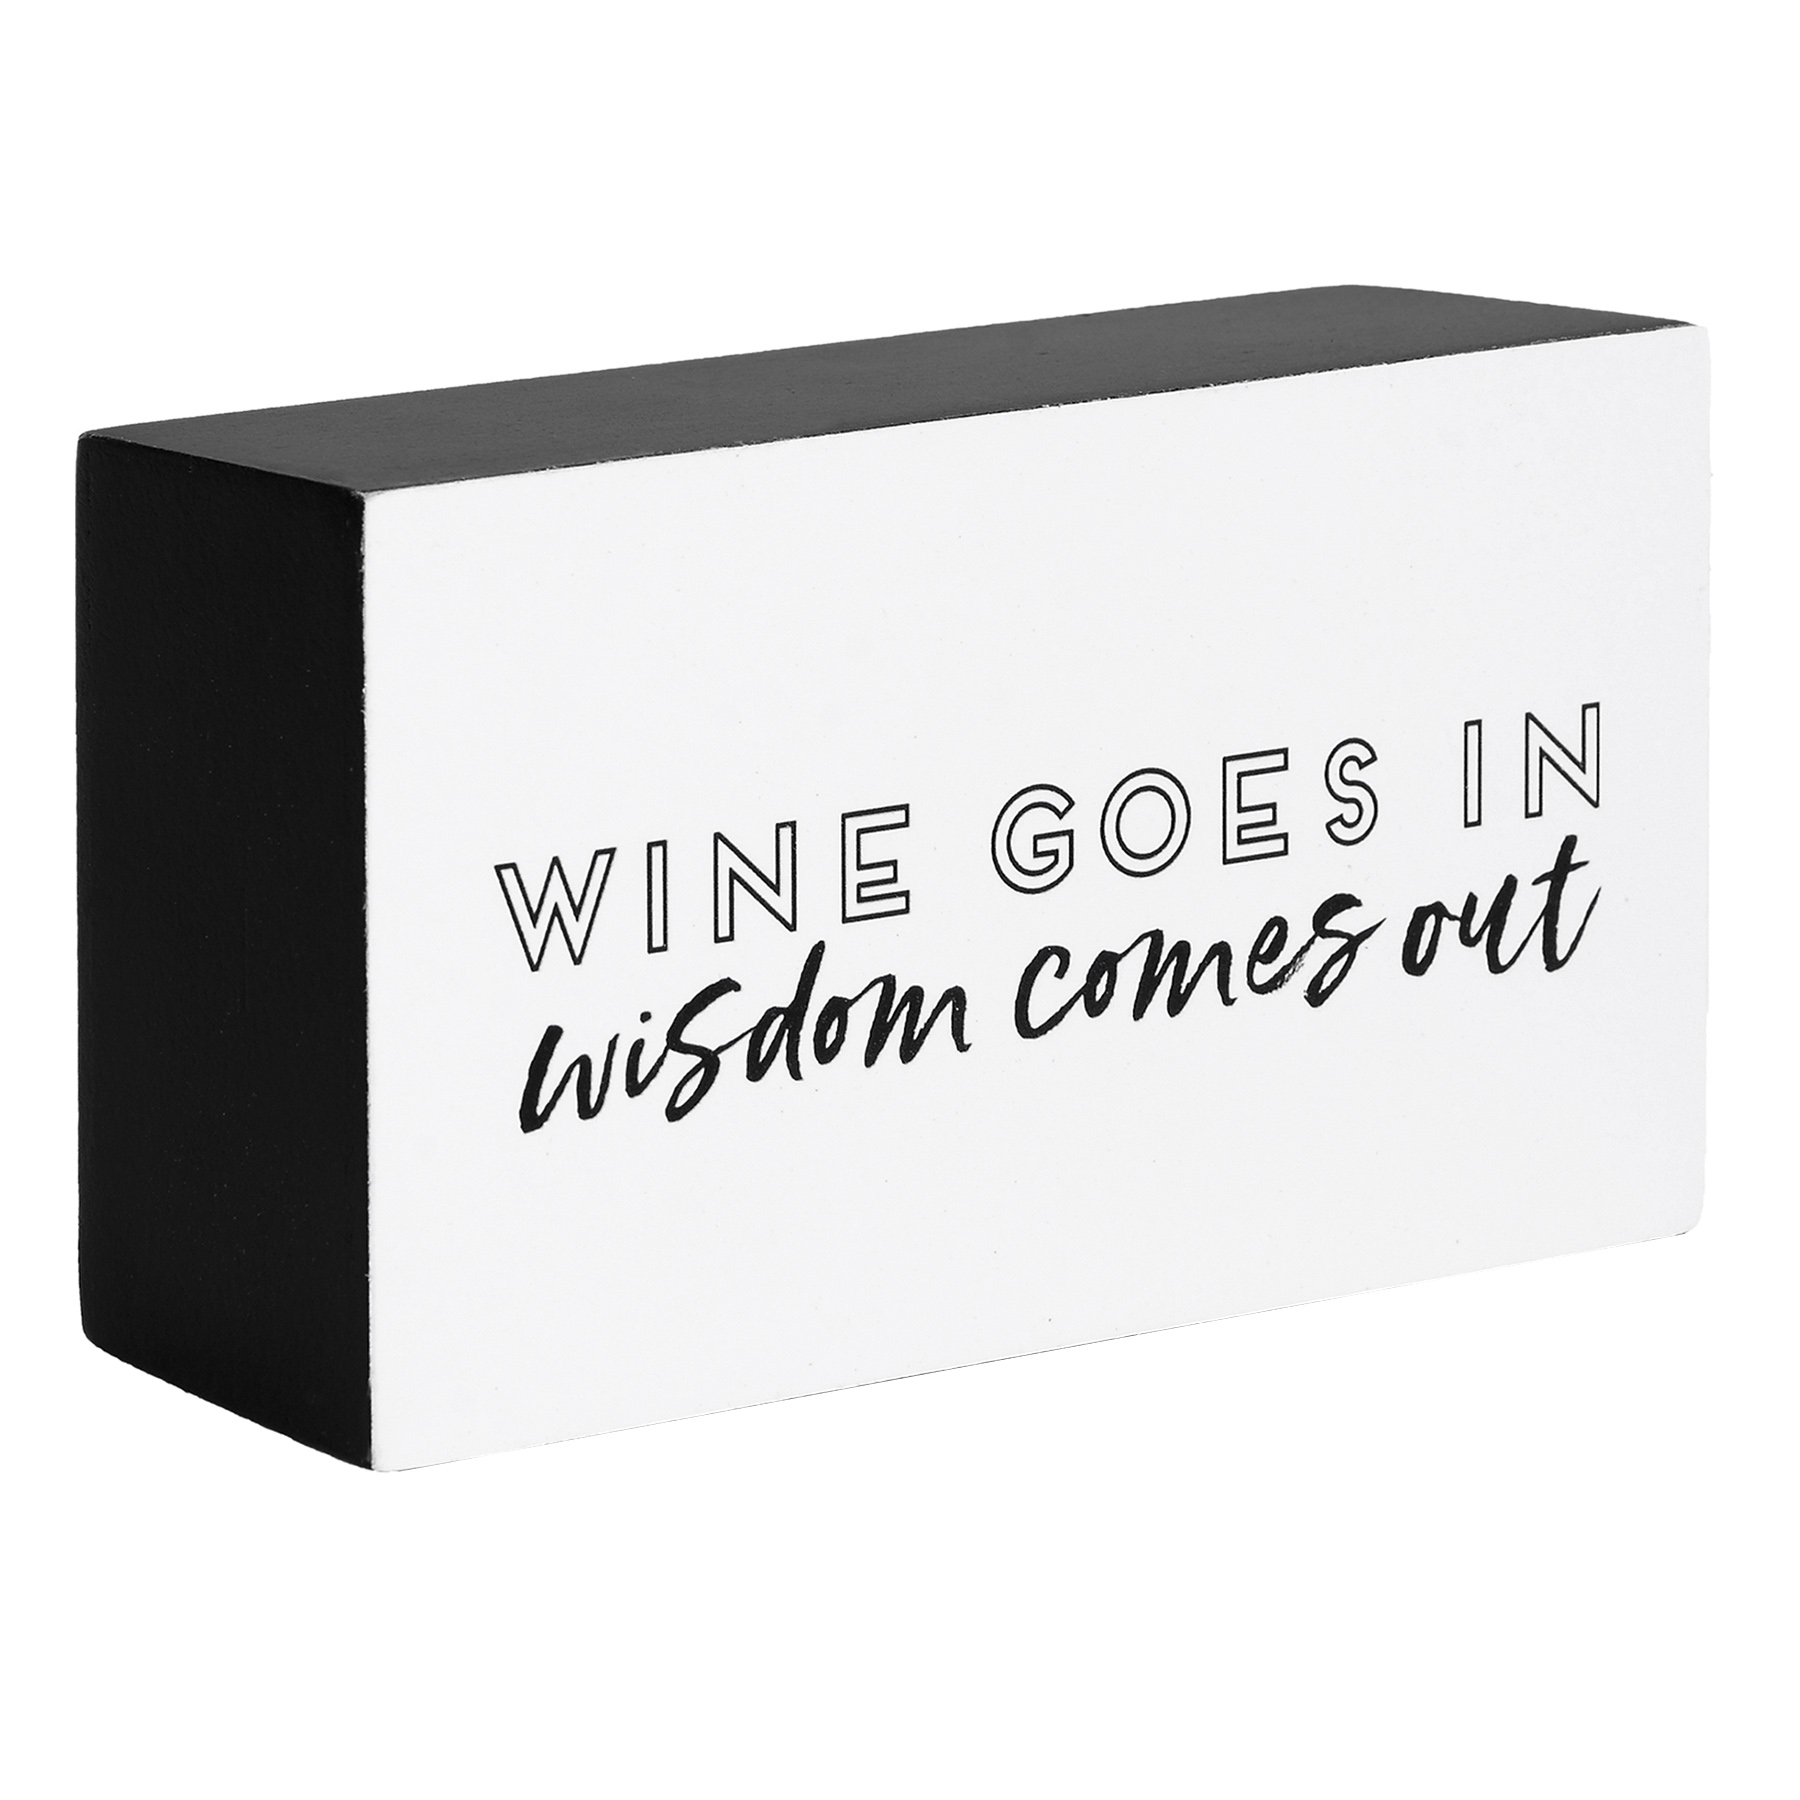 With Discount Wine Goes In Decorative Block, 3x5 in United States